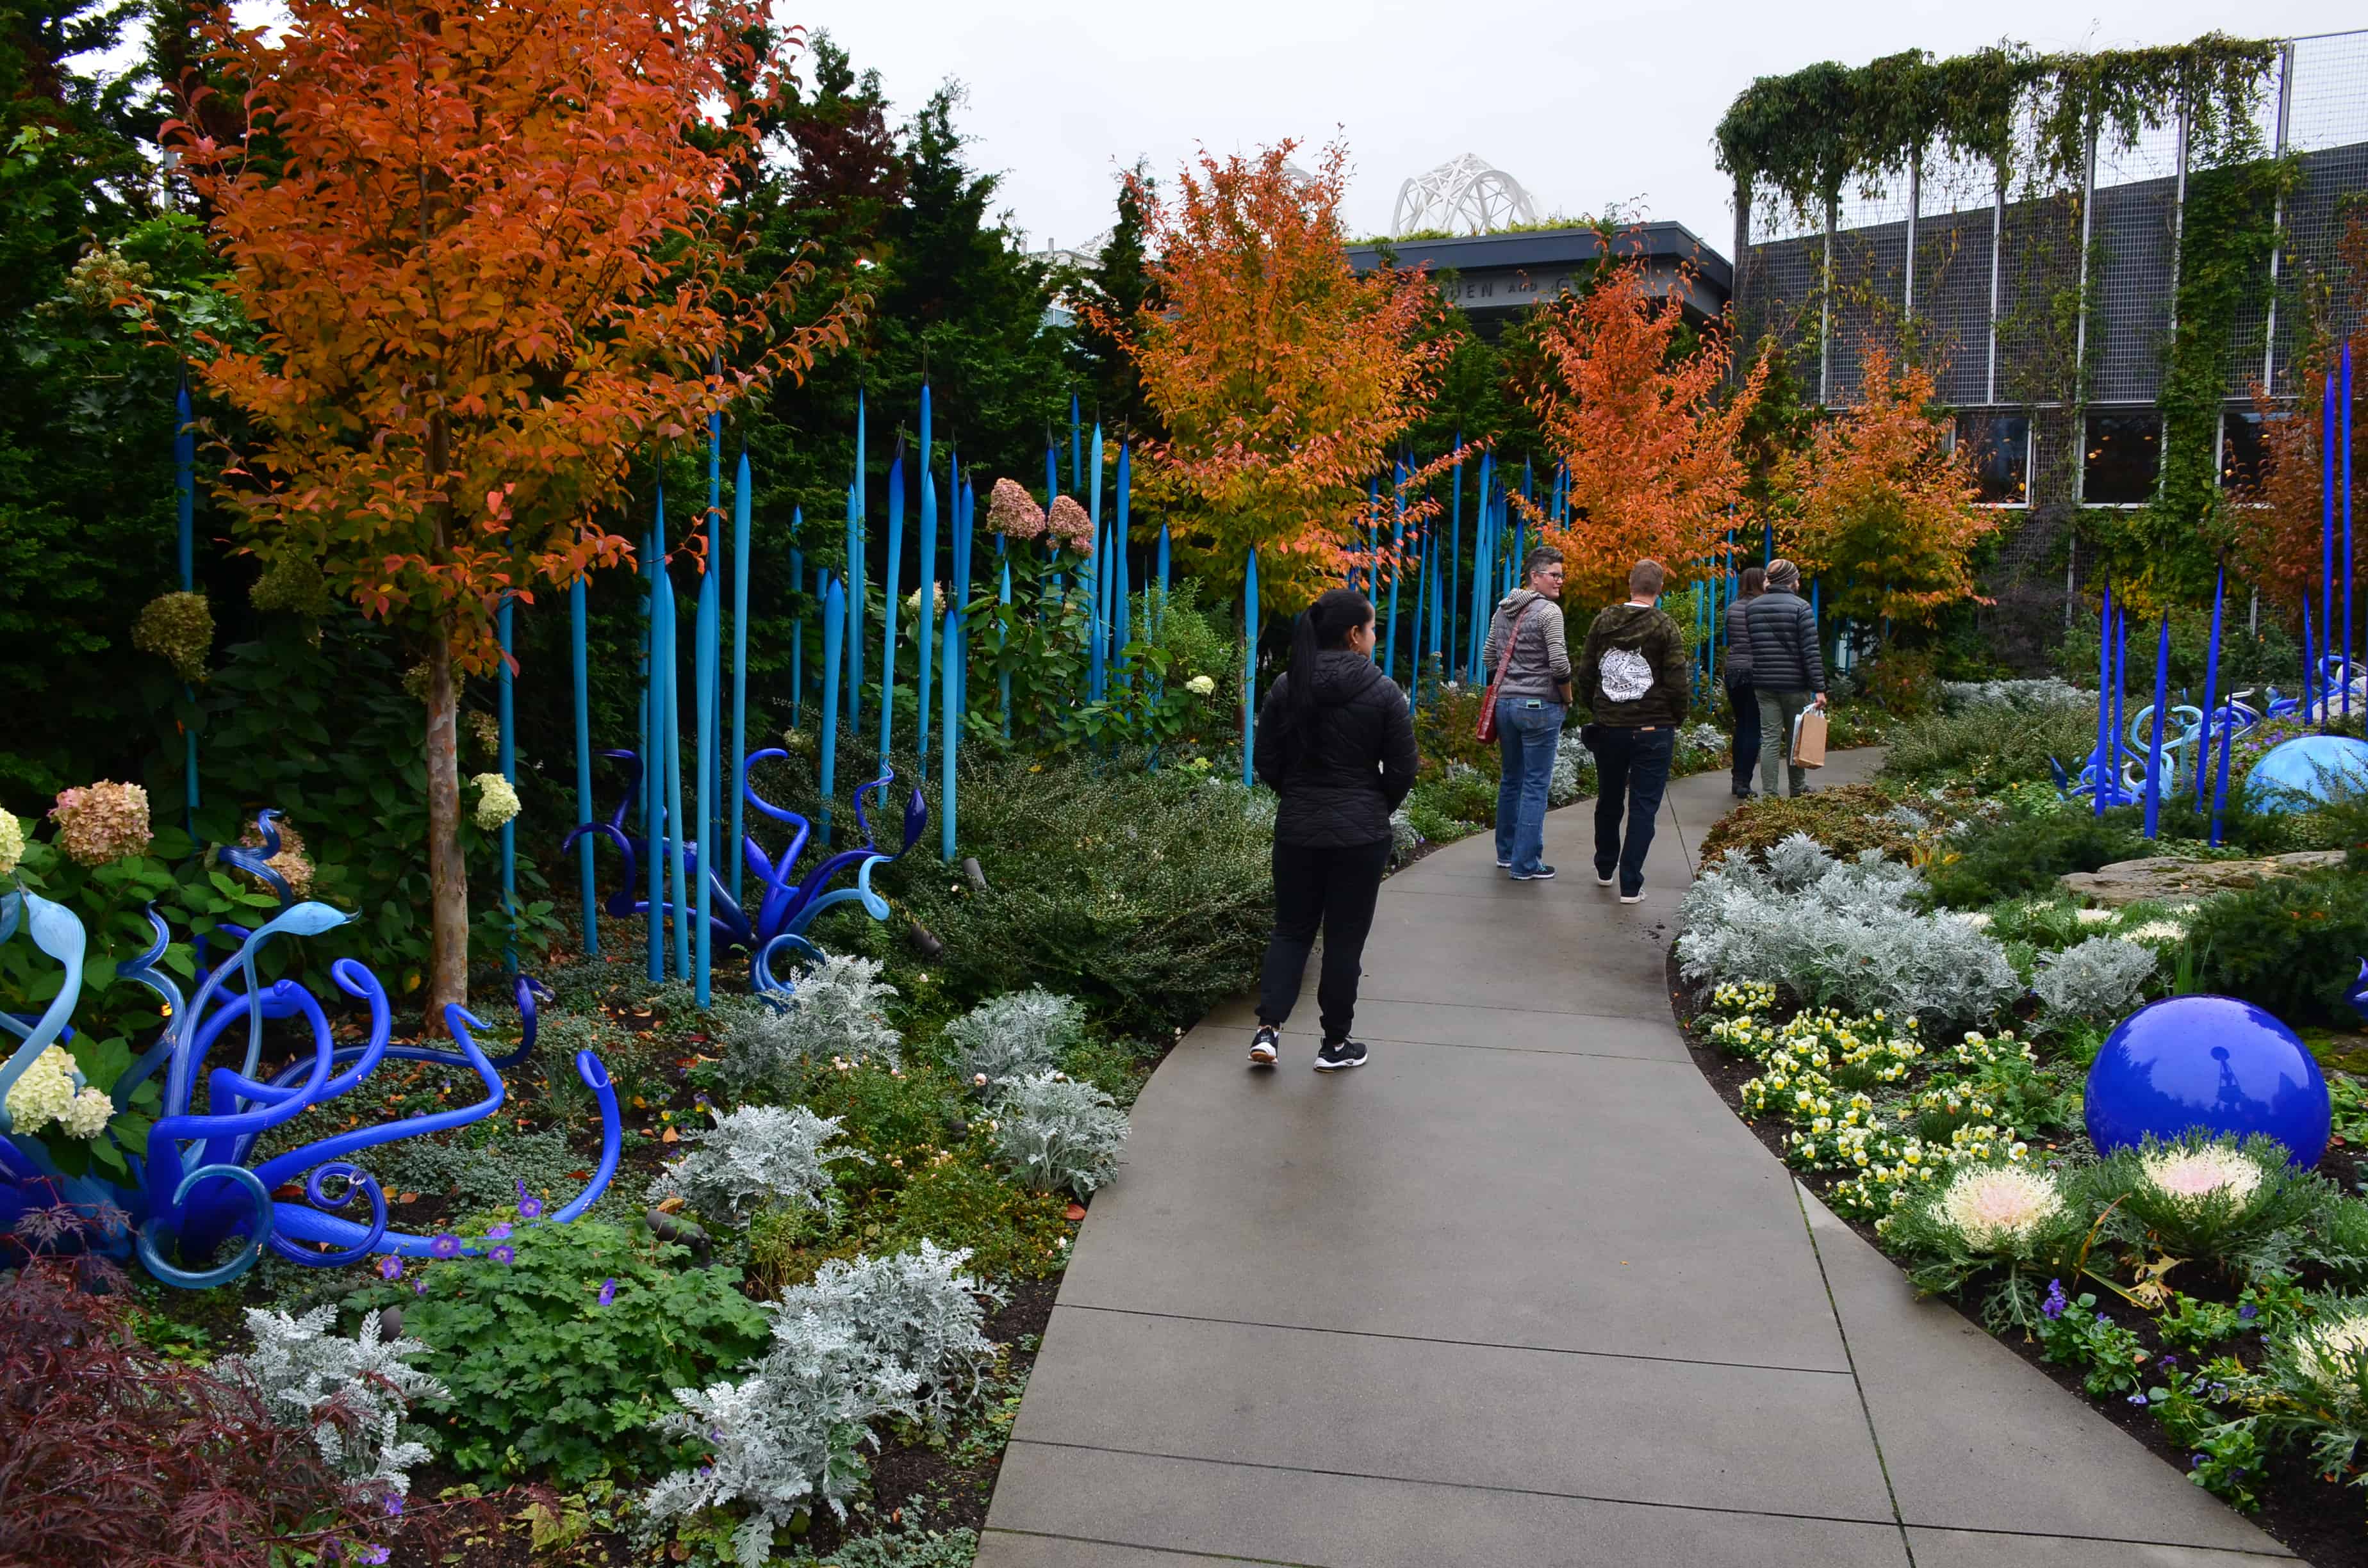 A section of the Garden at Chihuly Garden and Glass in Seattle, Washington